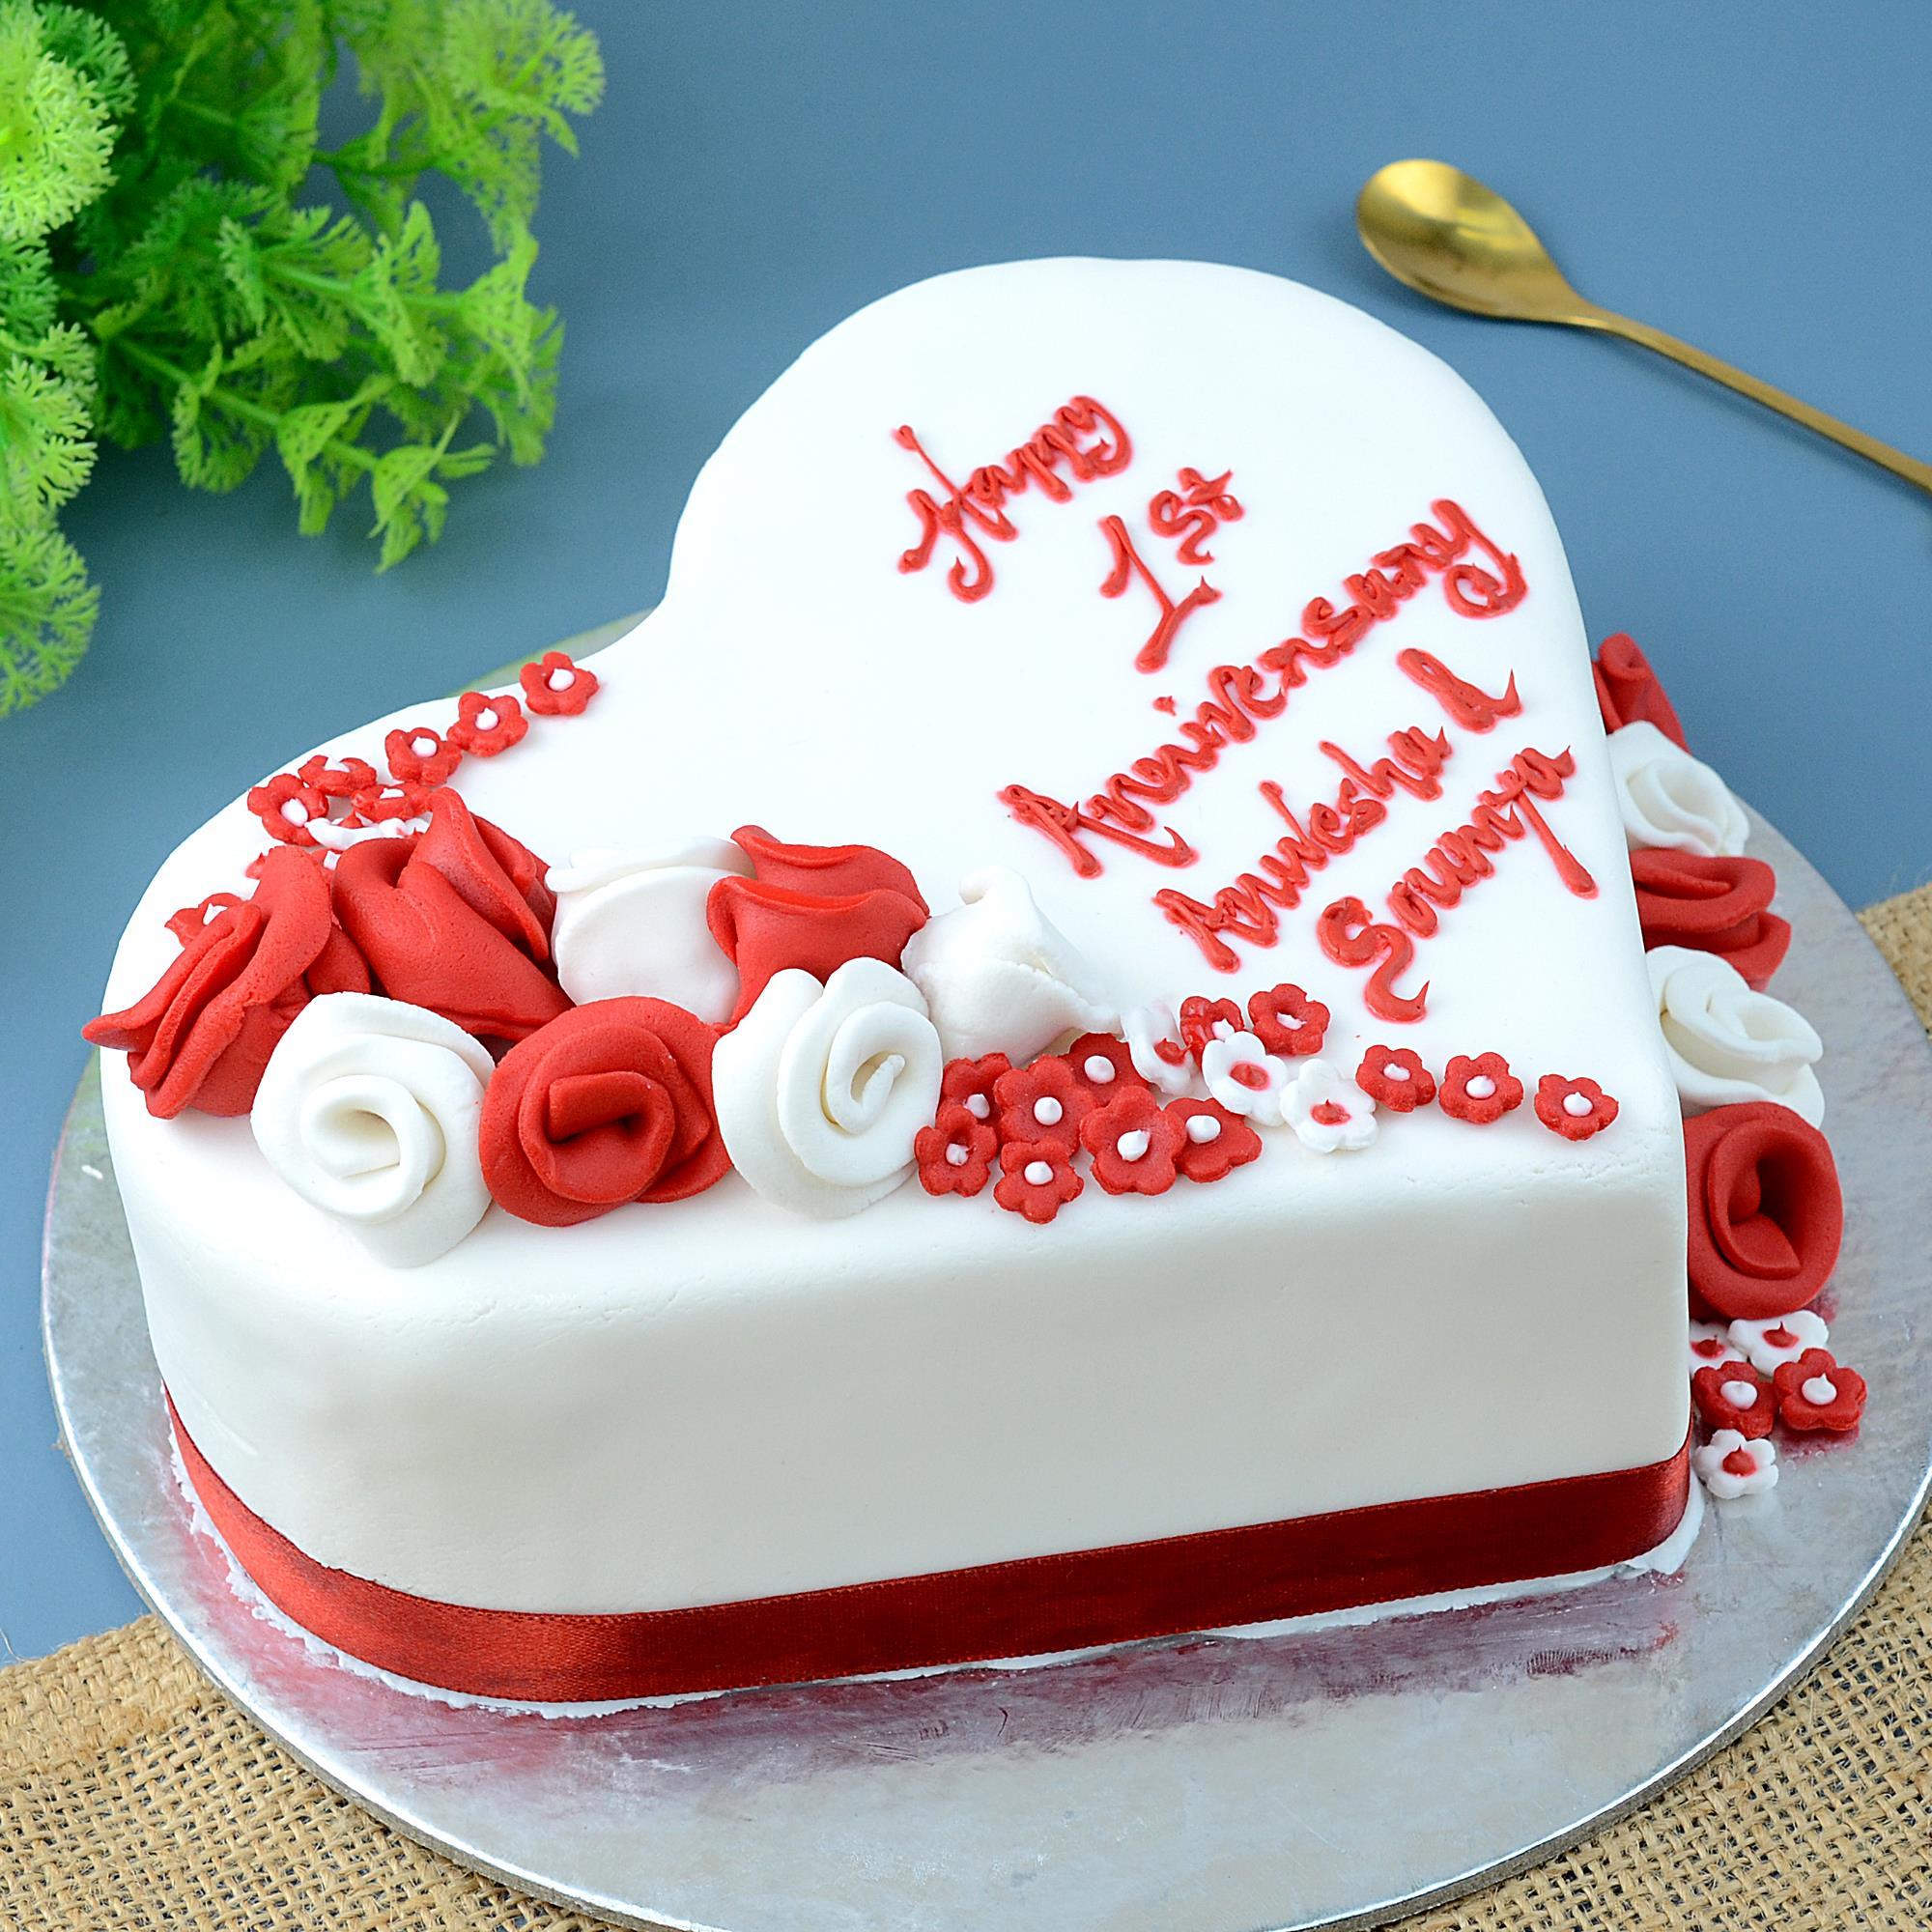 Write Couple's Name On Heart-shaped Wedding Anniversary Cake Wishes Images